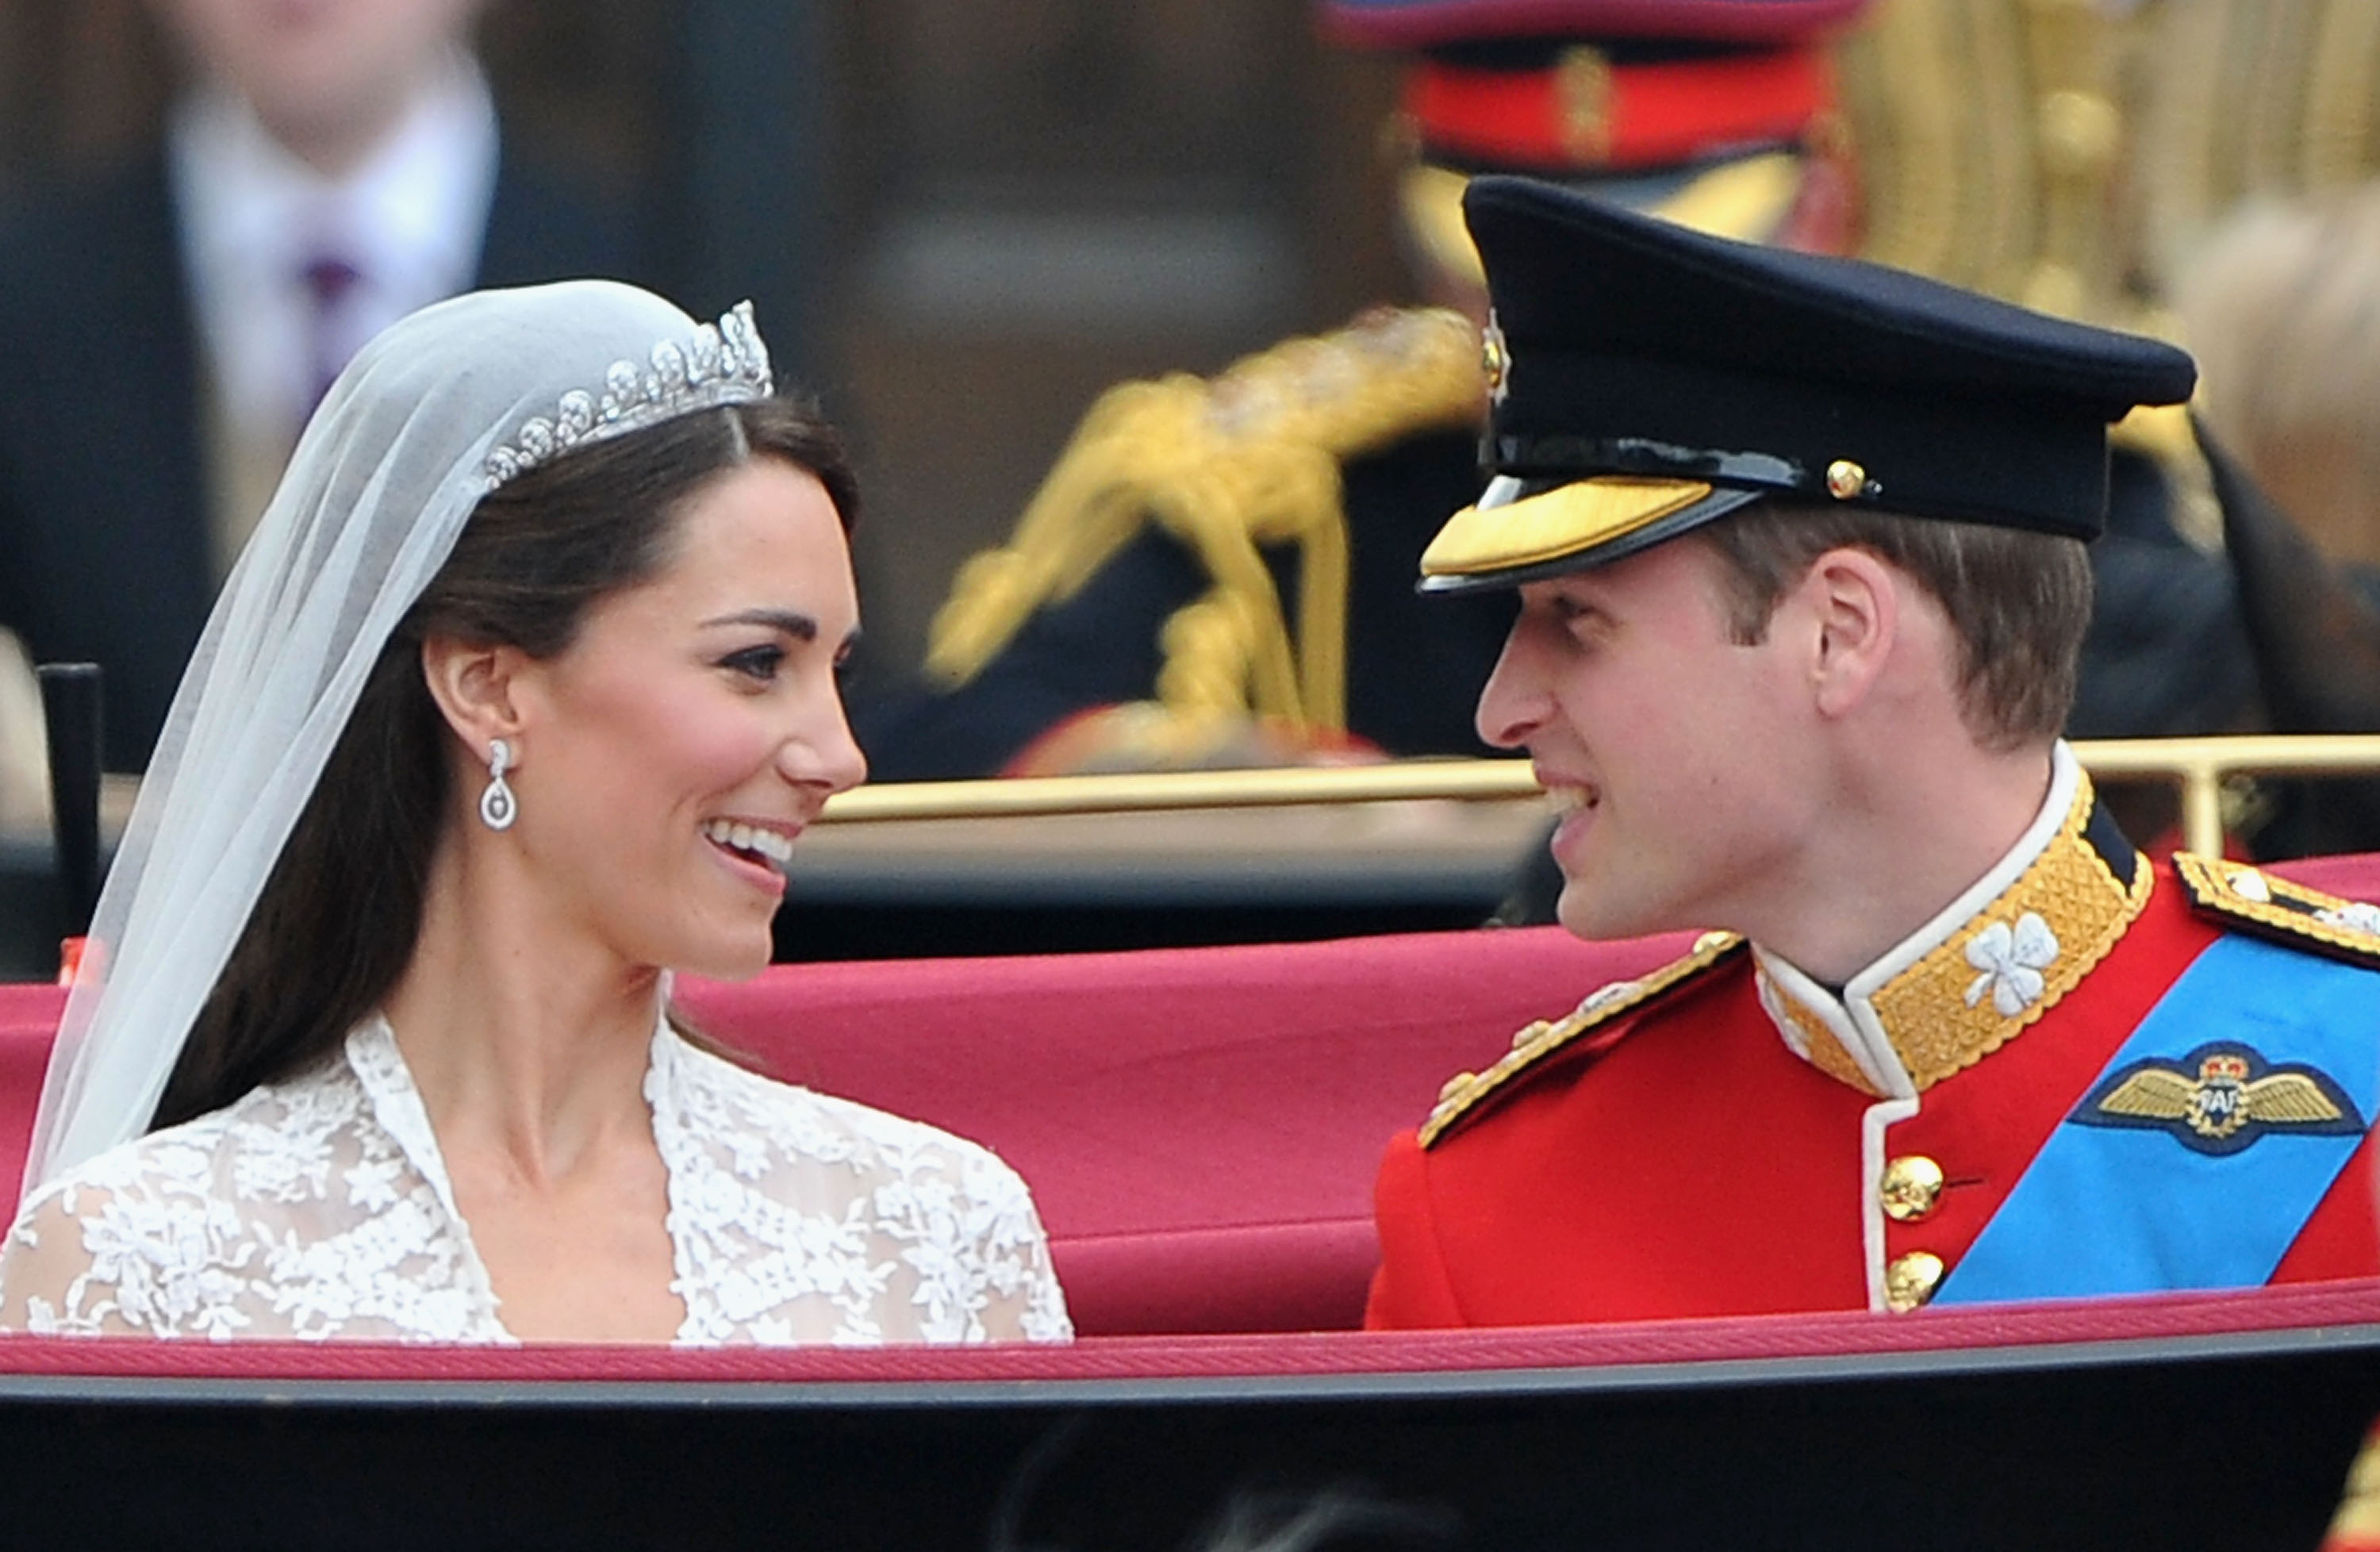 Prince William and Kate Middleton gazing at each other during their carriage procession following their wedding